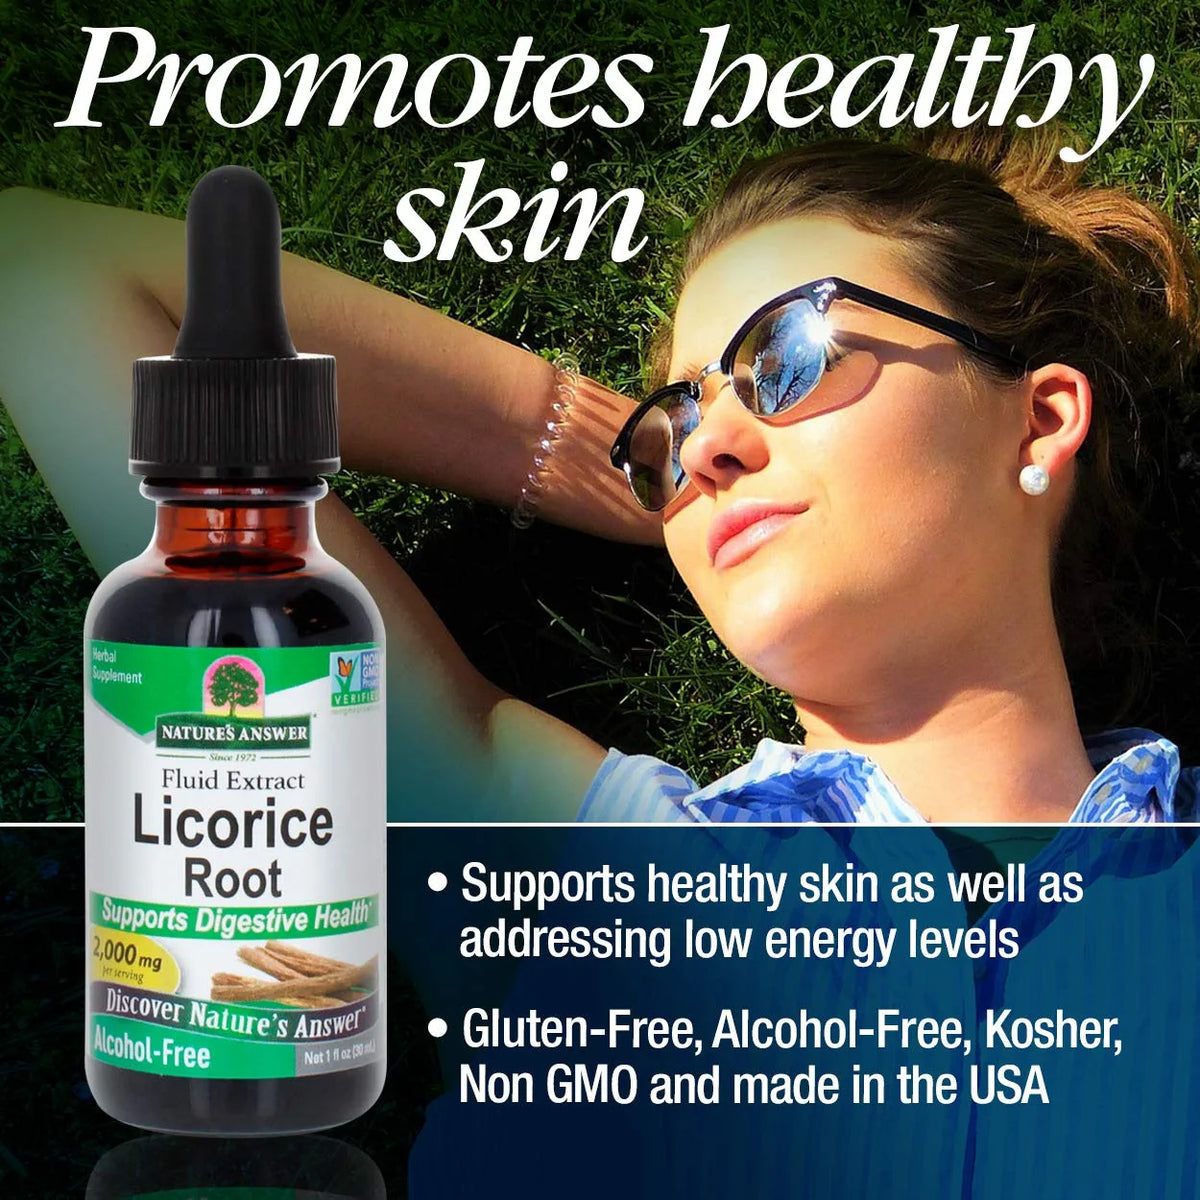 Nature's Answer - Fluid Extract Licorice Root 30ml